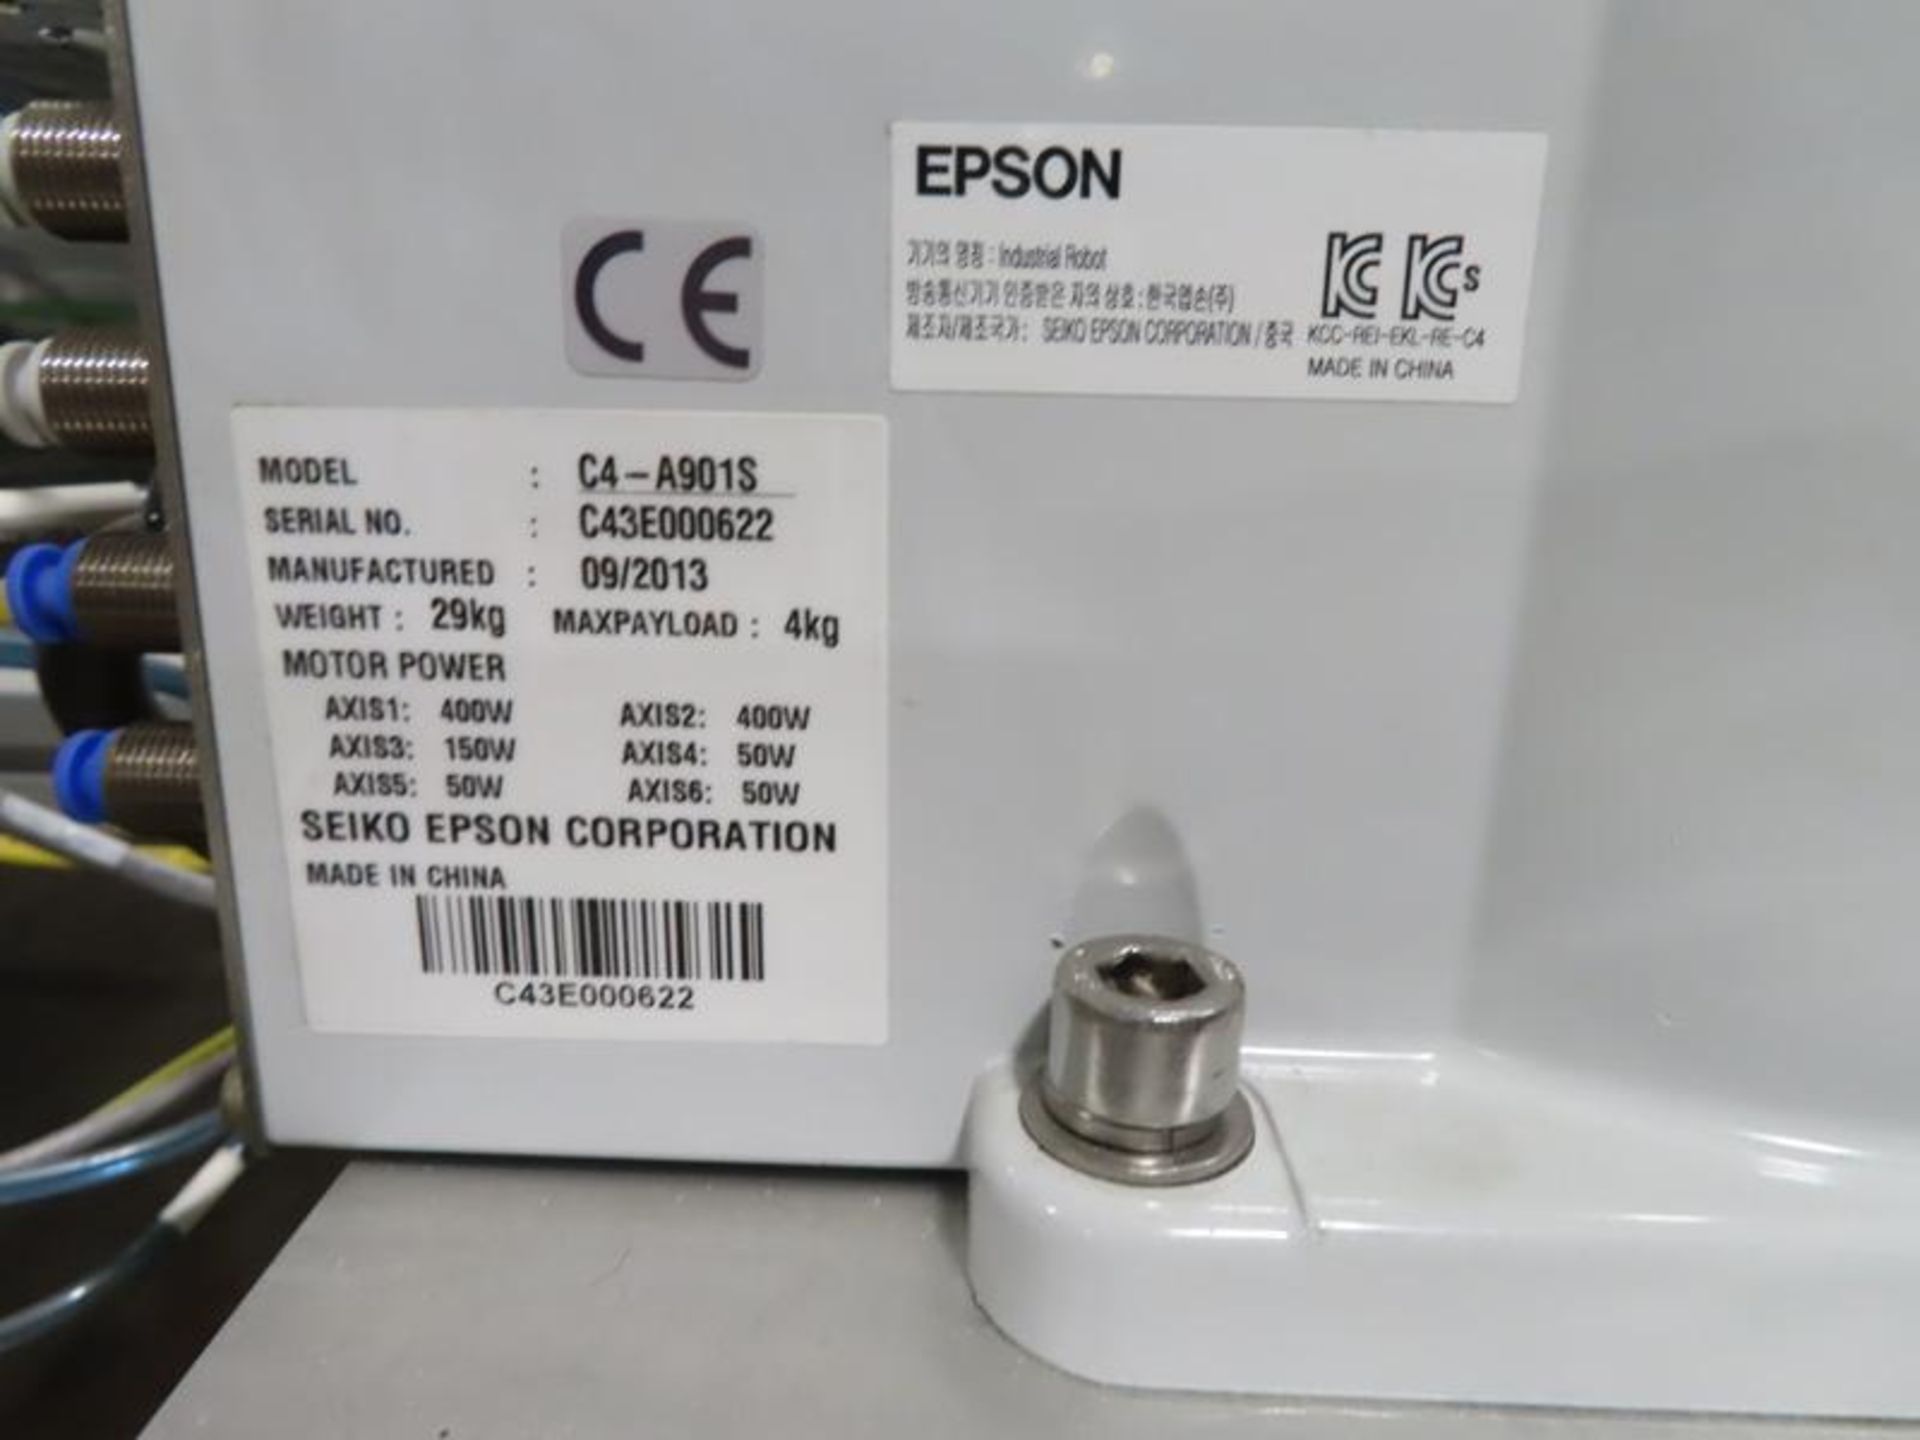 2013 Epson Model C4-A901S Robot with Safety Cell (approx 4.5ft x 6ft) - Image 4 of 4